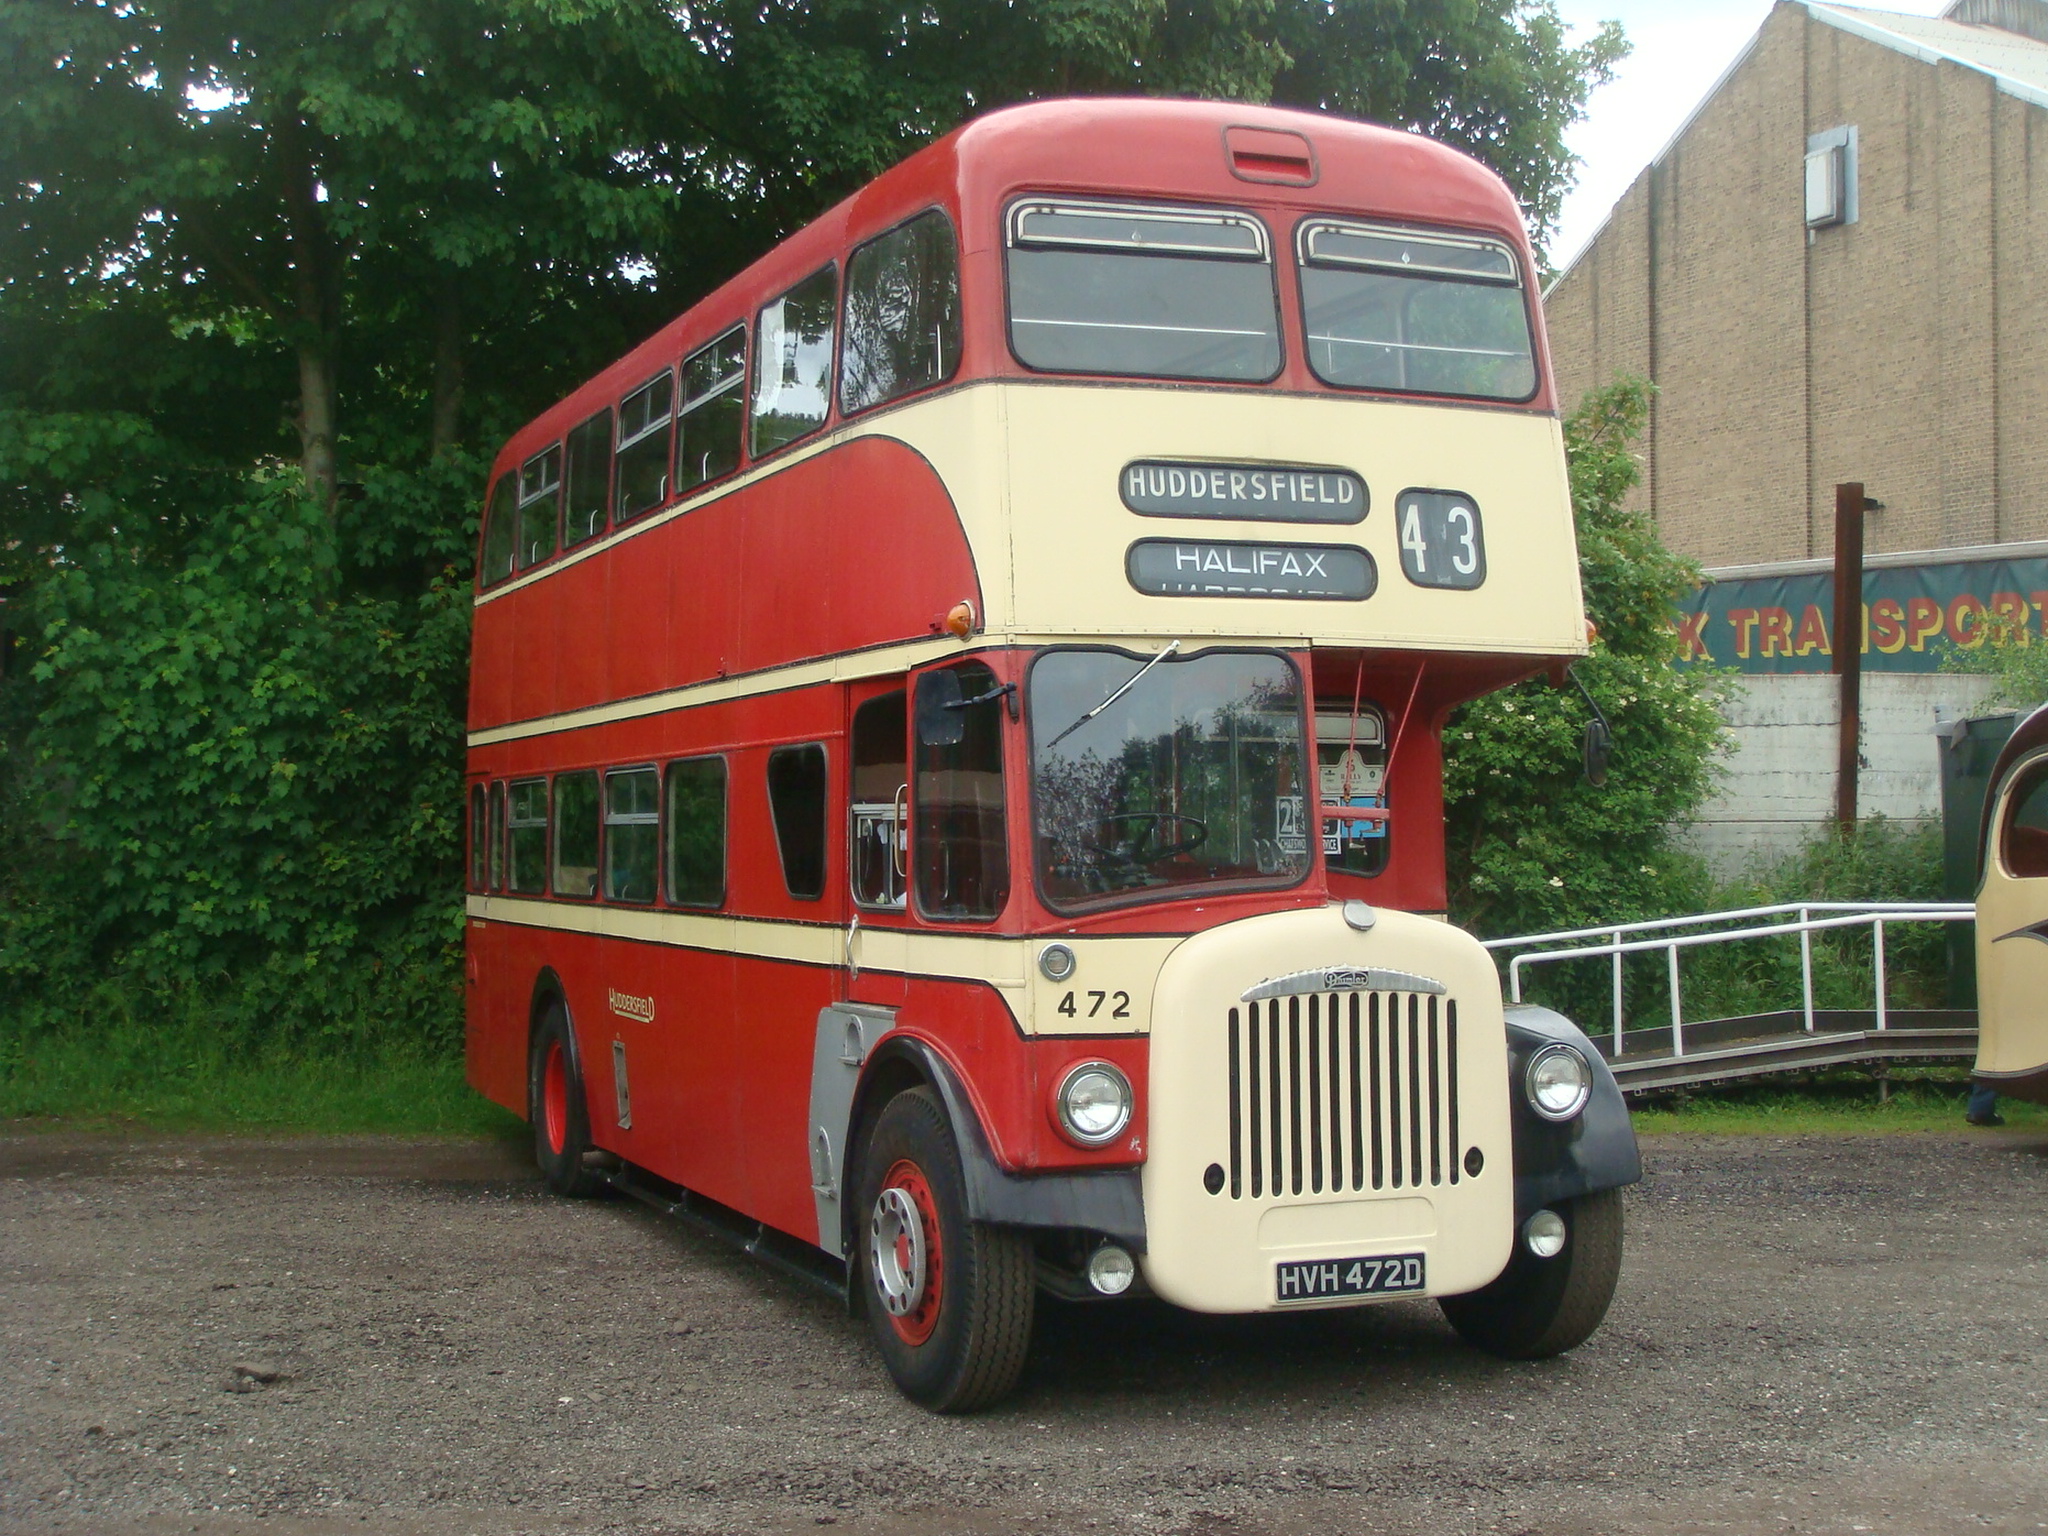 an old double decker bus parked in front of a building